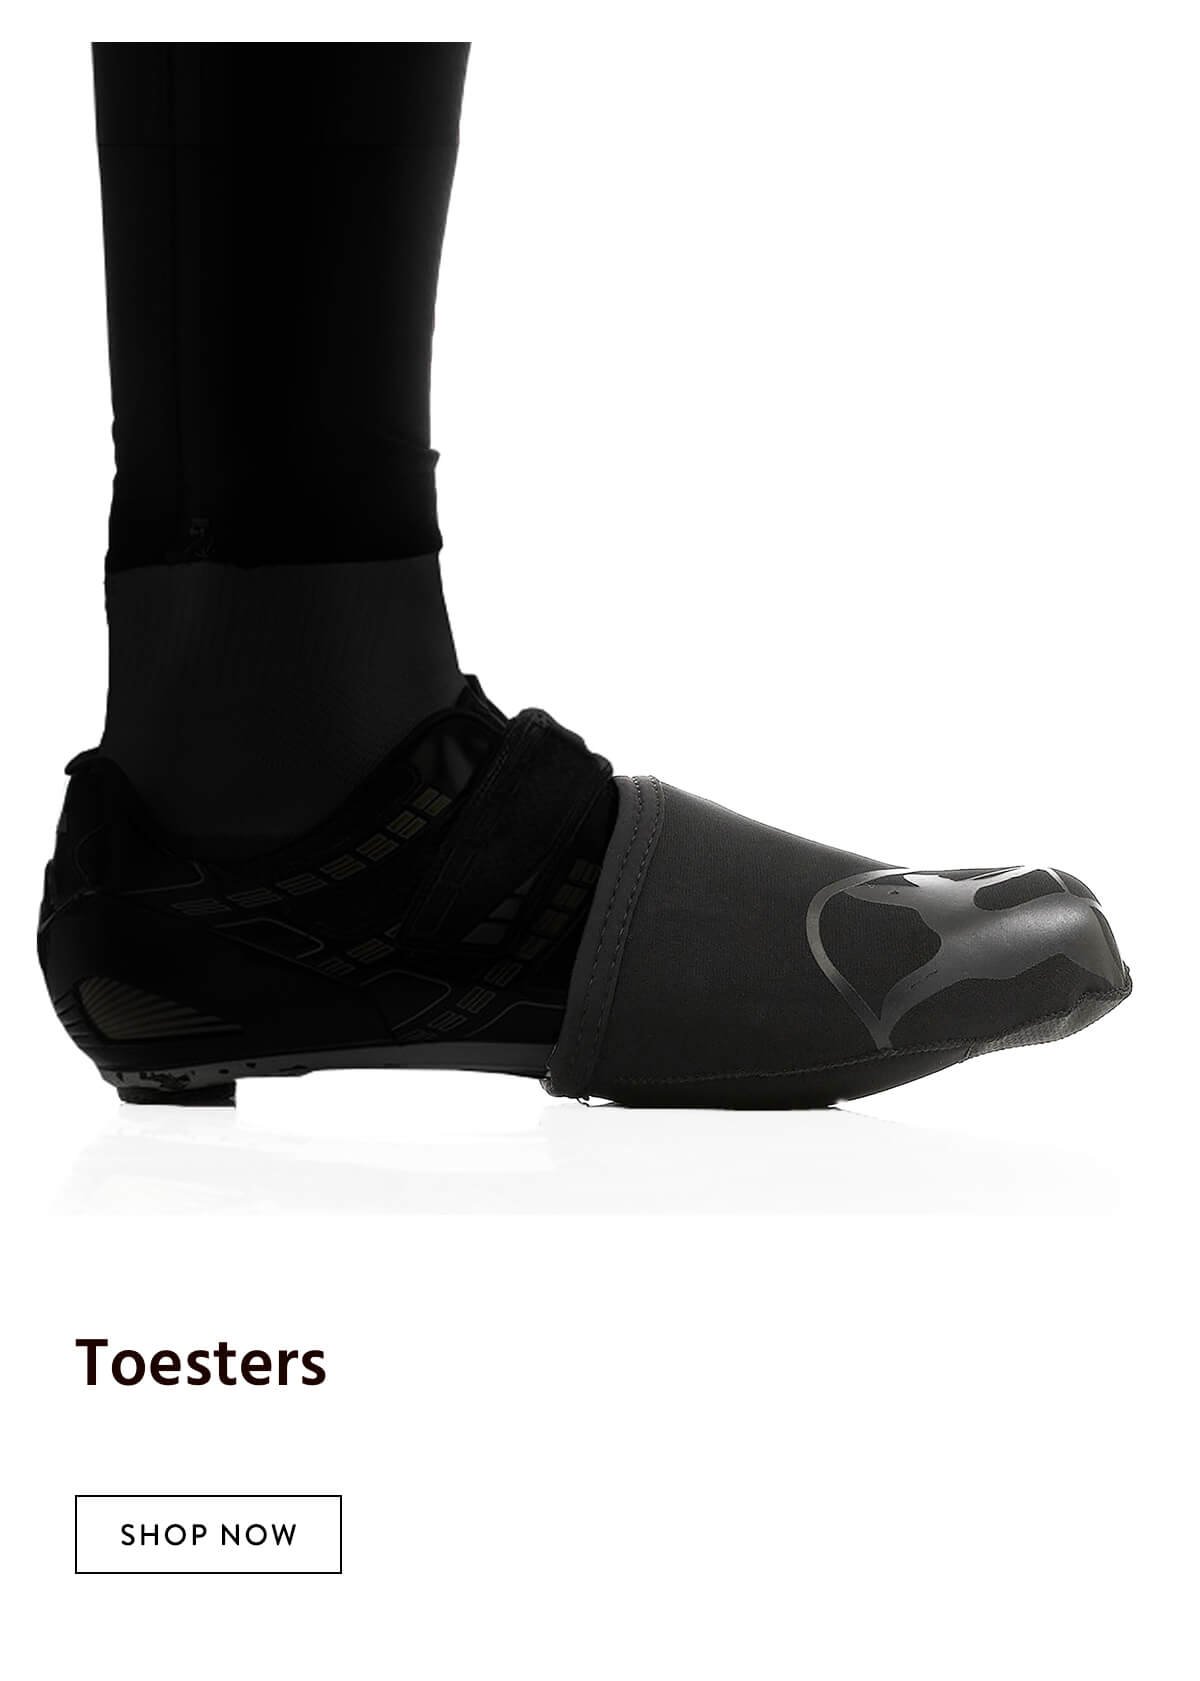 toesters